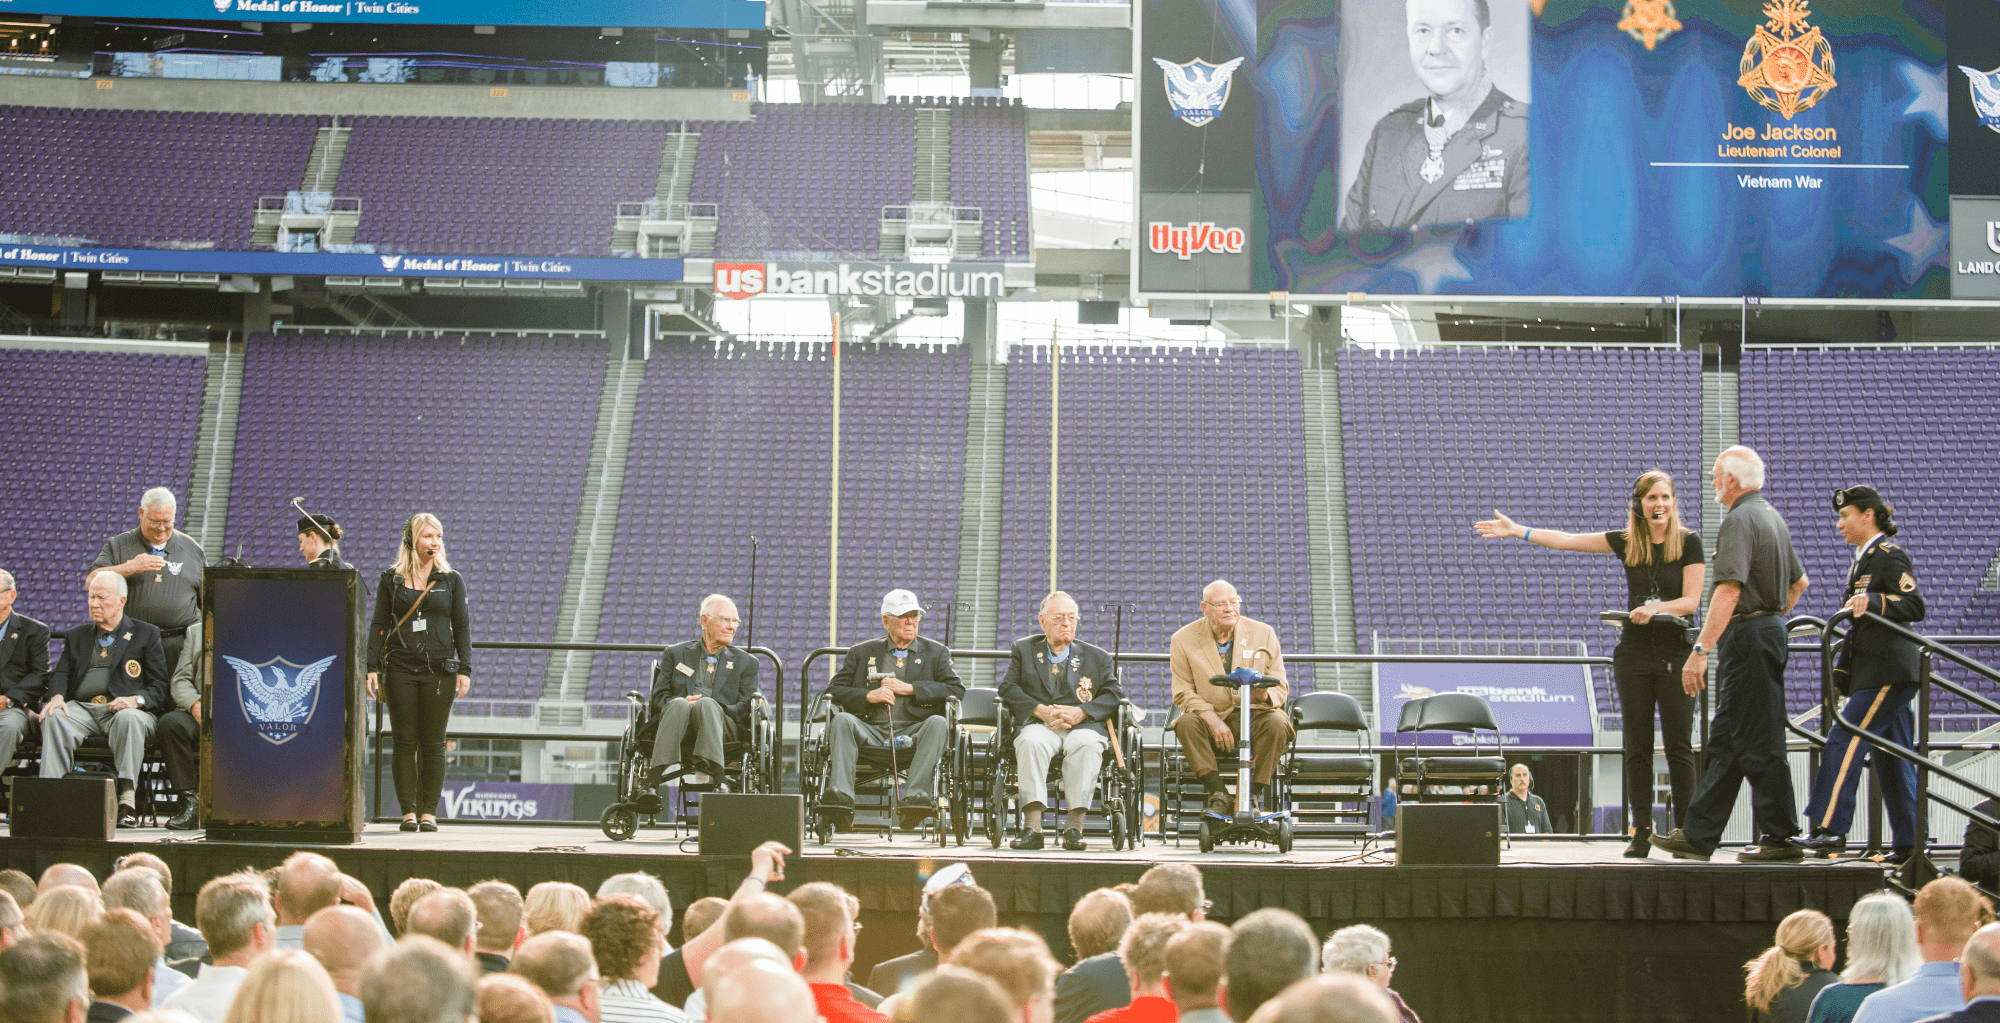 Medal of Honor Honorary Ceremony at US Bank Stadium